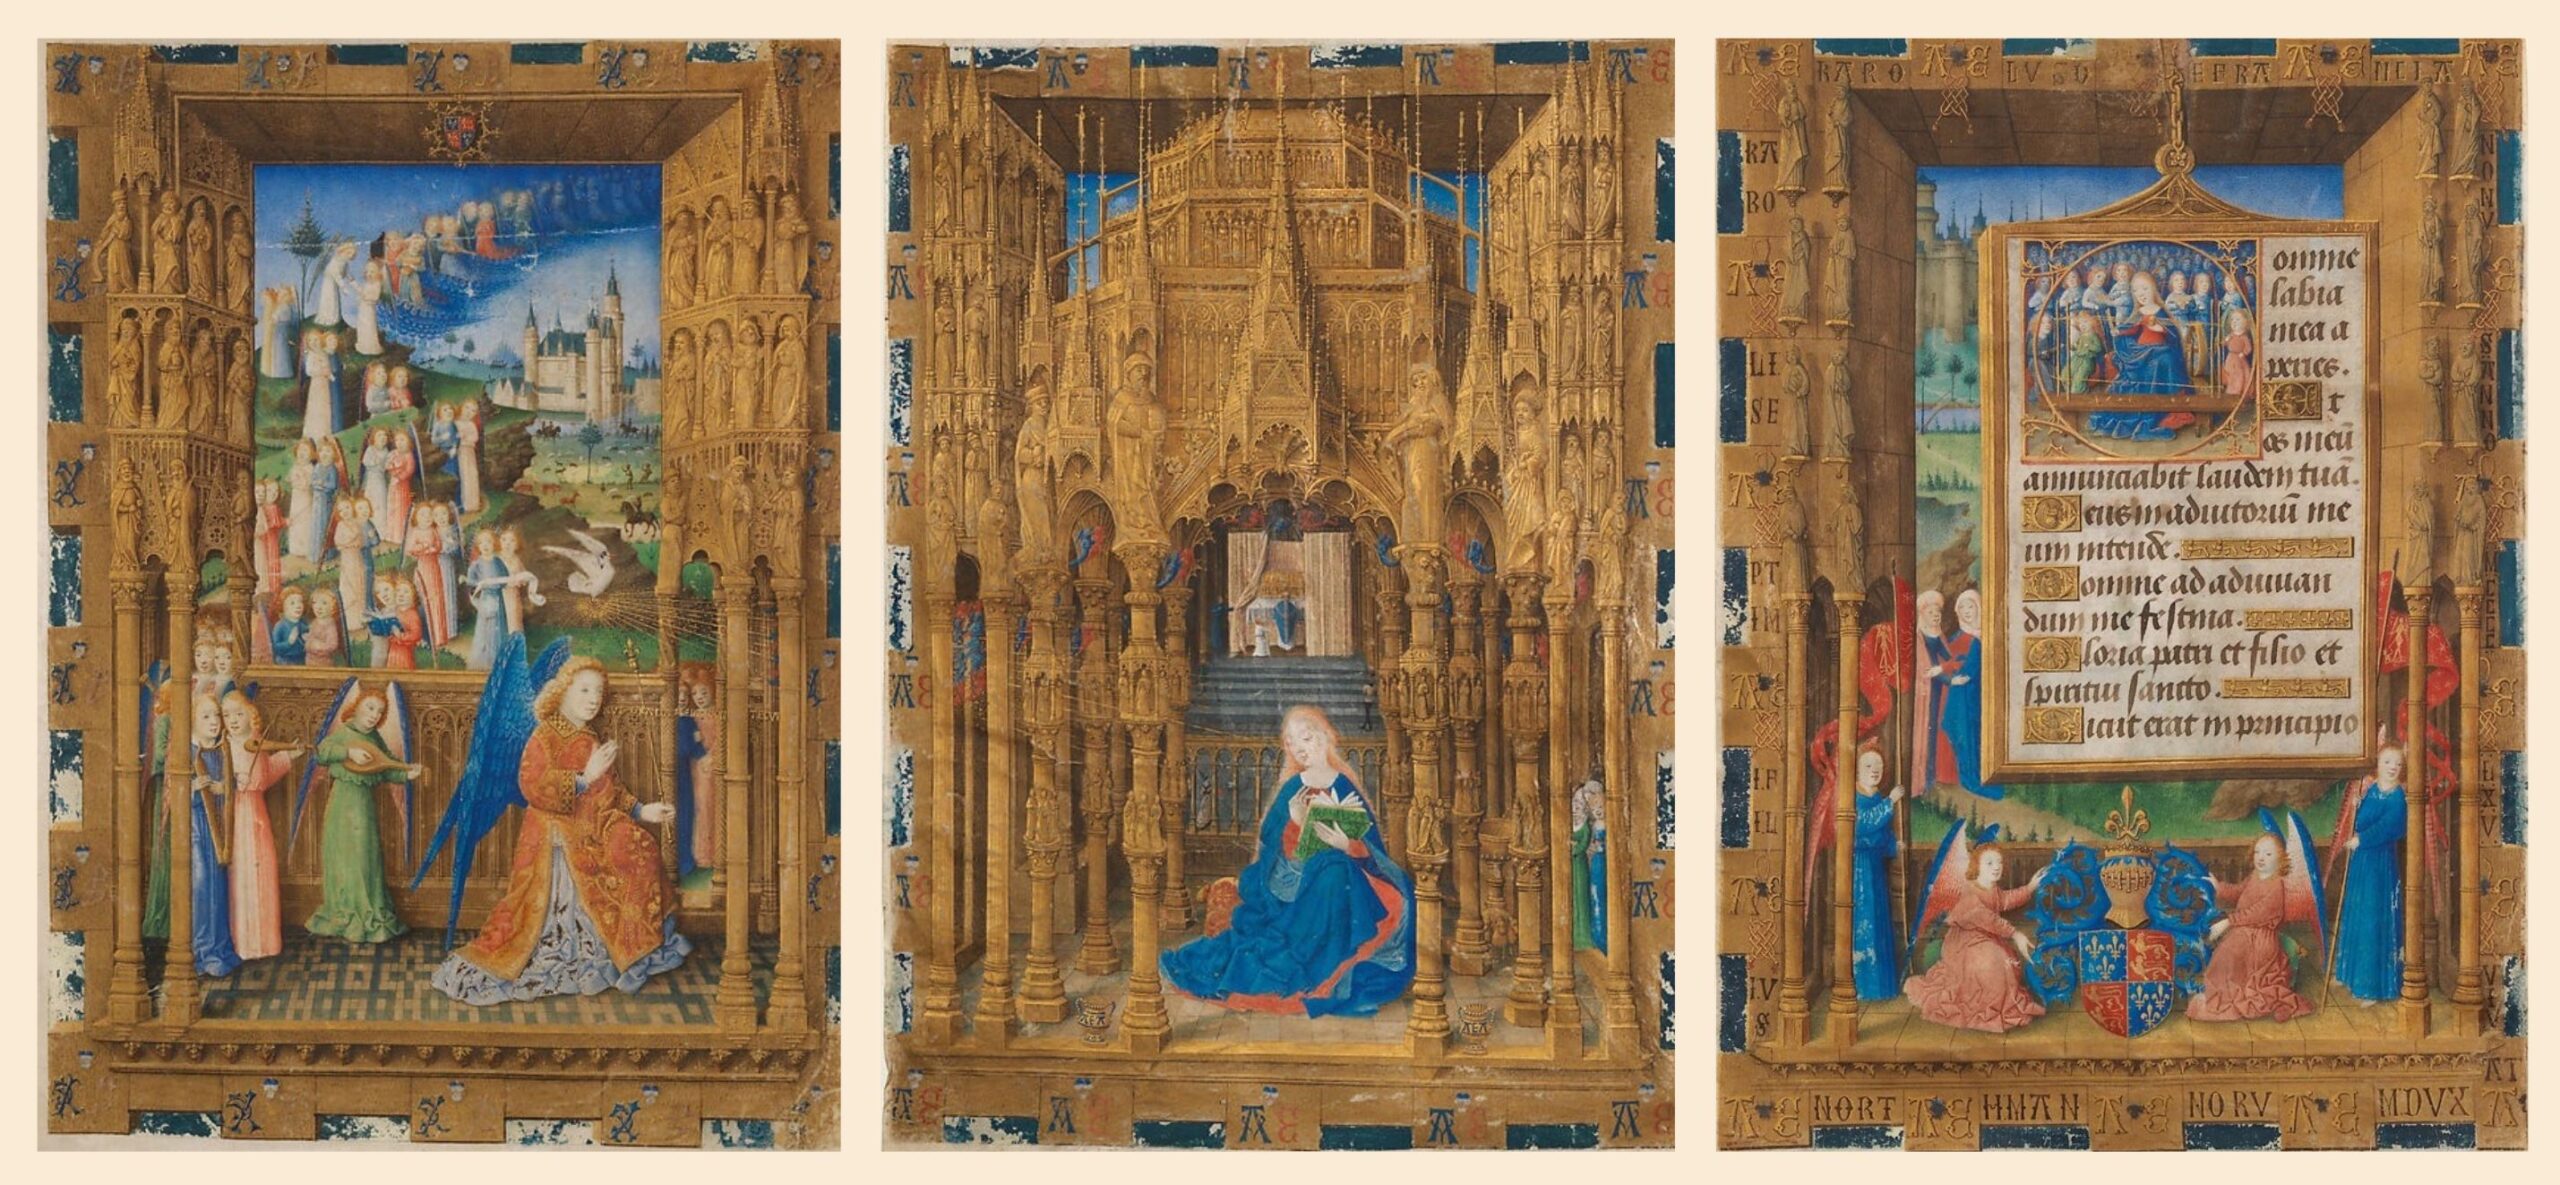 Master of Charles of France 1465 Annunciation Hours of Charles of France MET triptyque